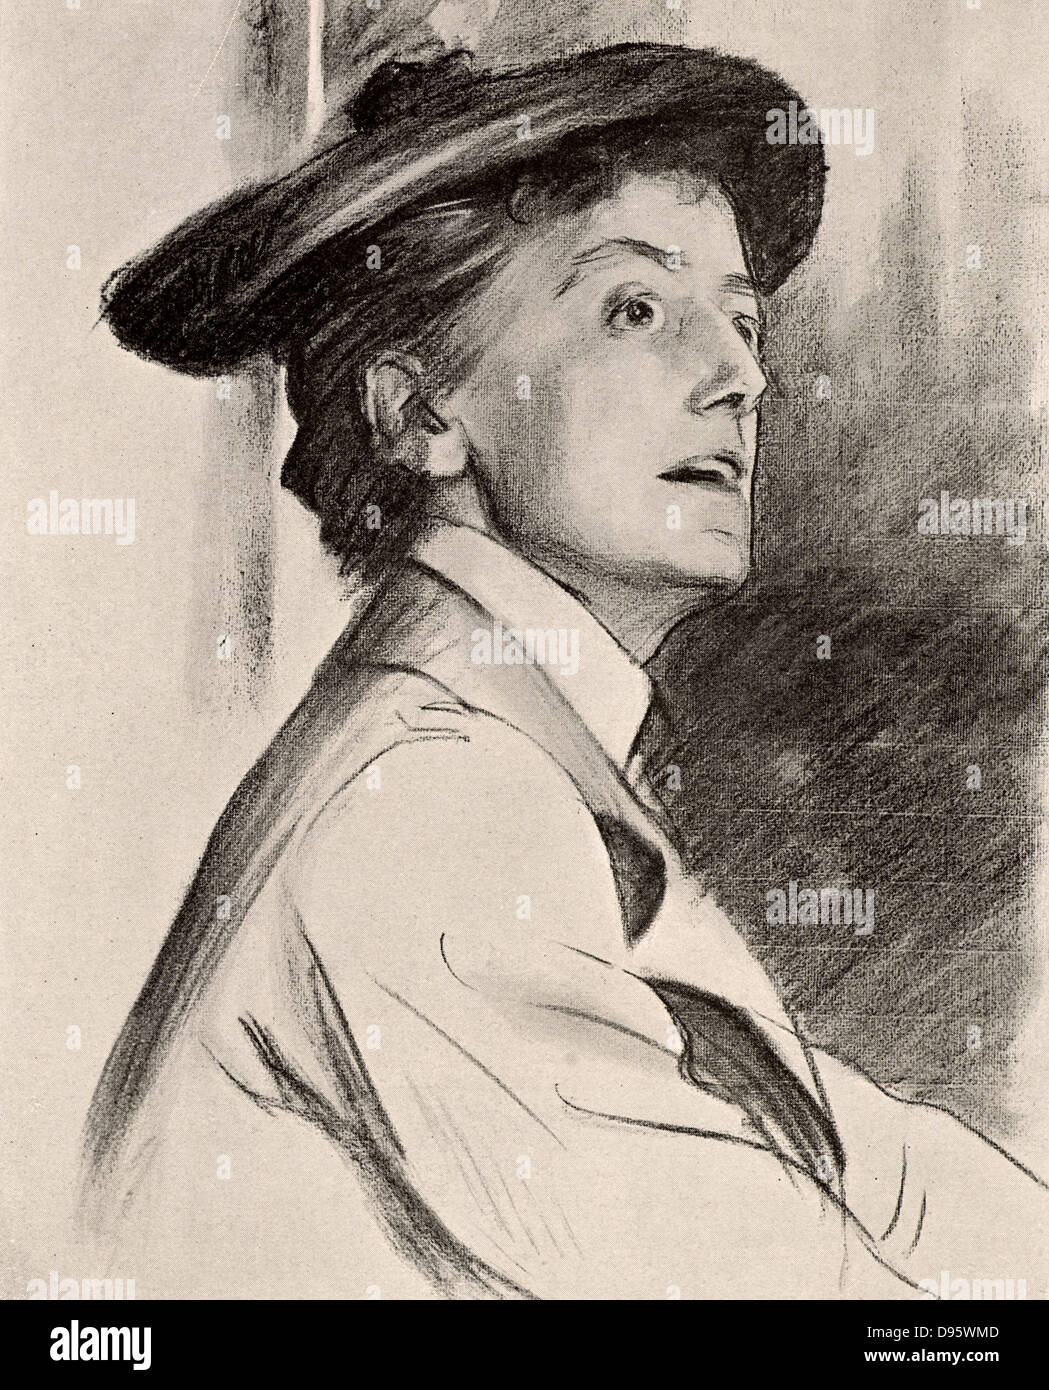 Ethel Mary Smyth (1858-1944) English composer and suffragette. She wrote the suffragettes' battle song 'The March of the Women' (1911), choral works, symphonies and operas 'Der Wald' (1901), 'The Wreckers' (1906) and 'The Boatswain's Mate' (1902). After a drawing by John Singer Sargent.  From 'The Sphere' (London, 26 July 1902). Stock Photo